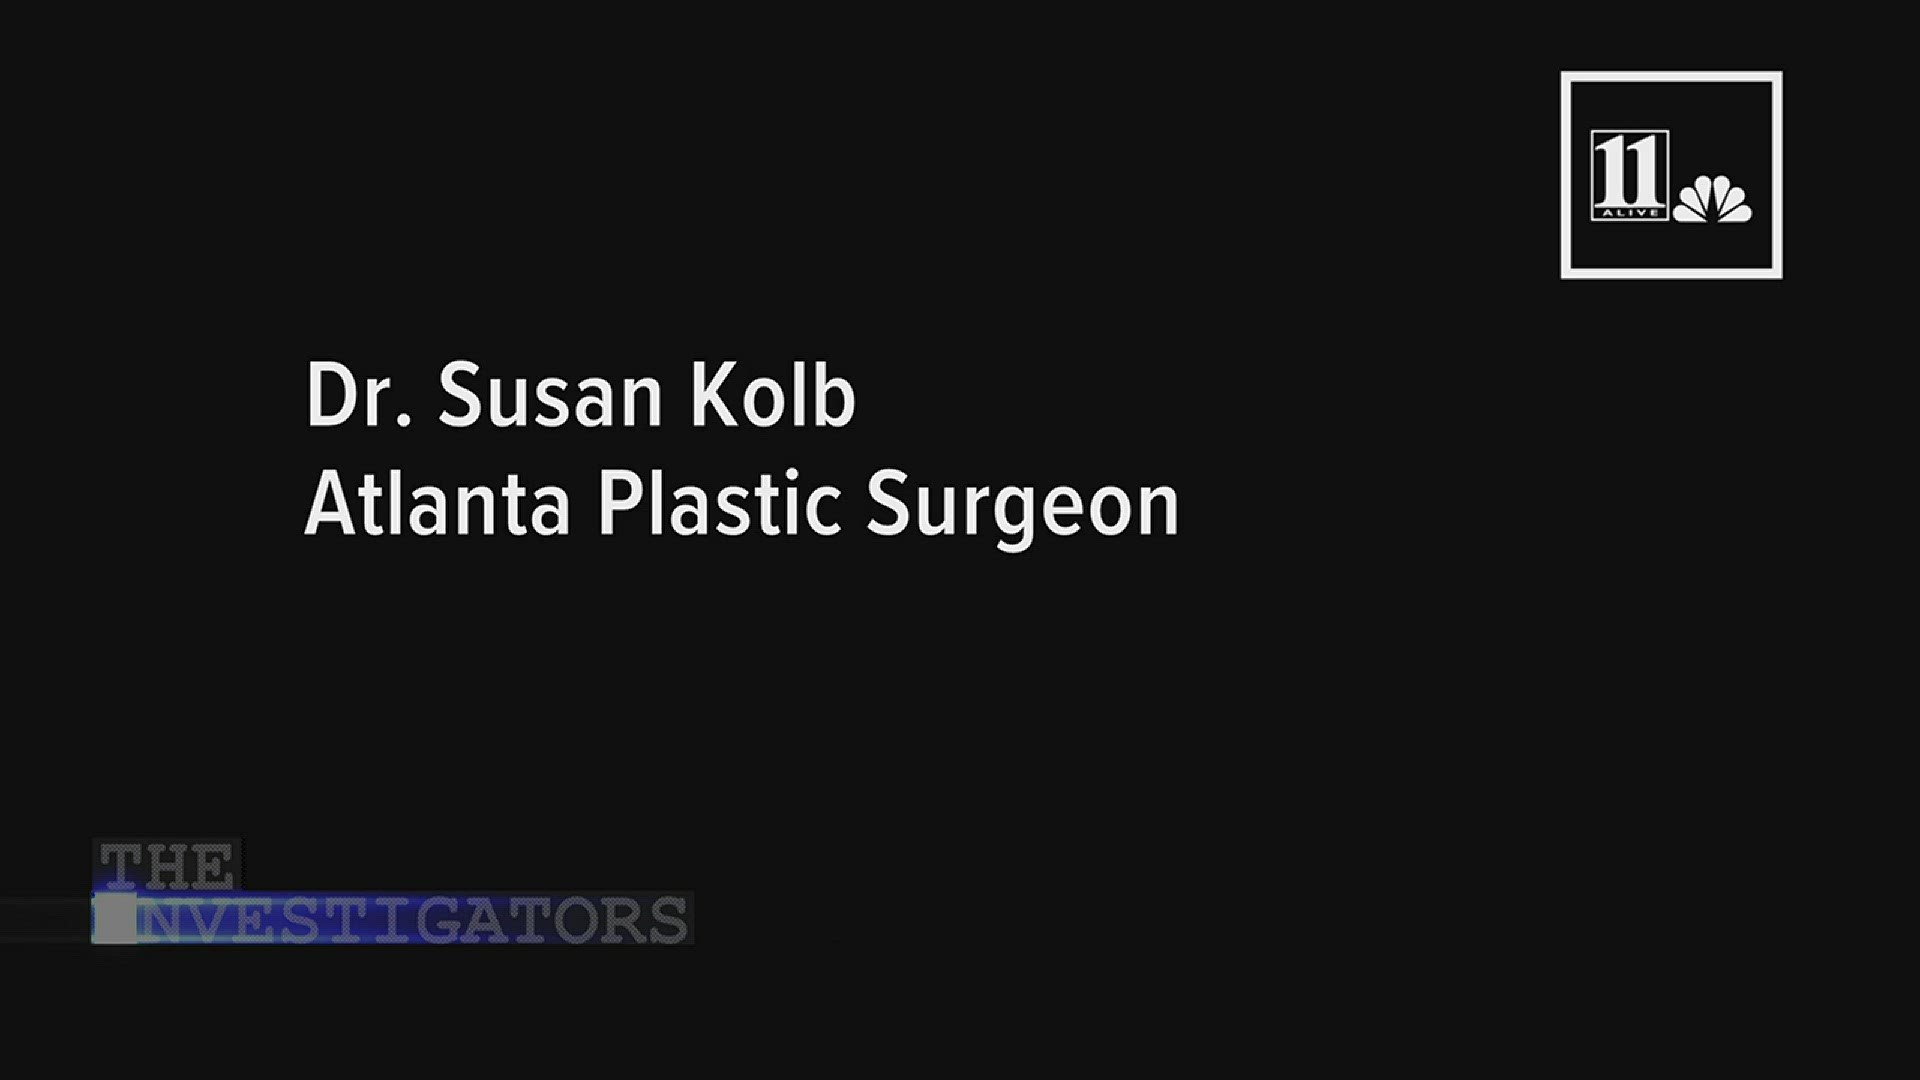 Atlanta surgeon, Dr. Susan Kolb, has a history of misconduct claims against her. Two metro Atlanta hospitals revoked her privileges, which prevents her from performing operations at their facilities.